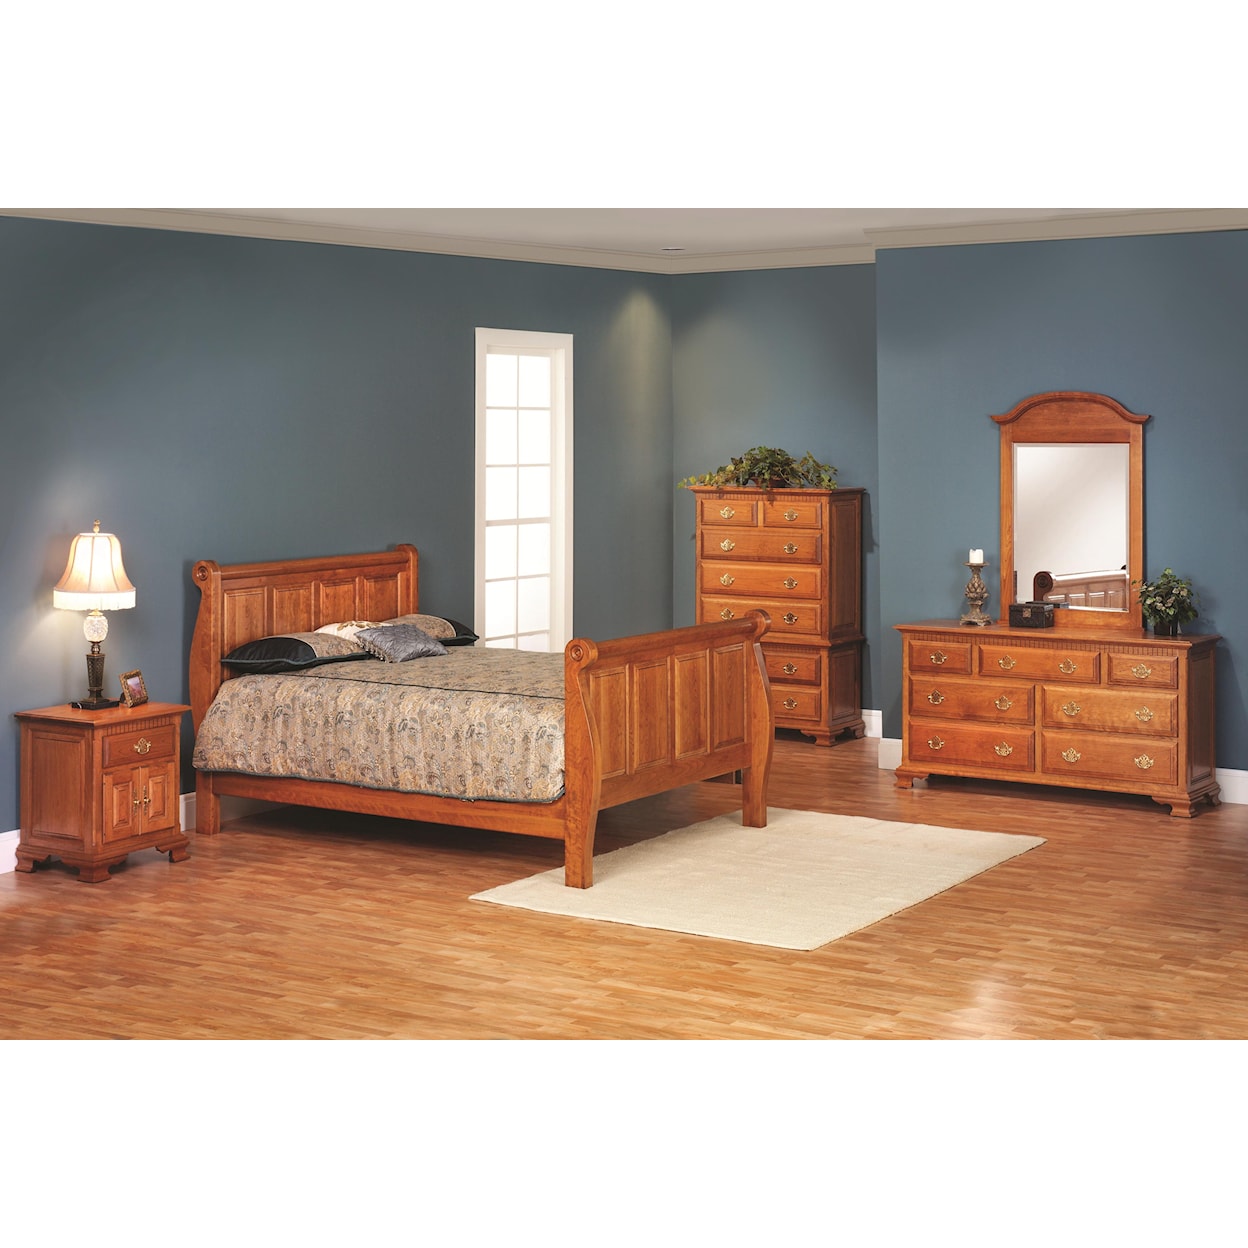 Millcraft Victorias Tradition King Sleigh Bedroom Group